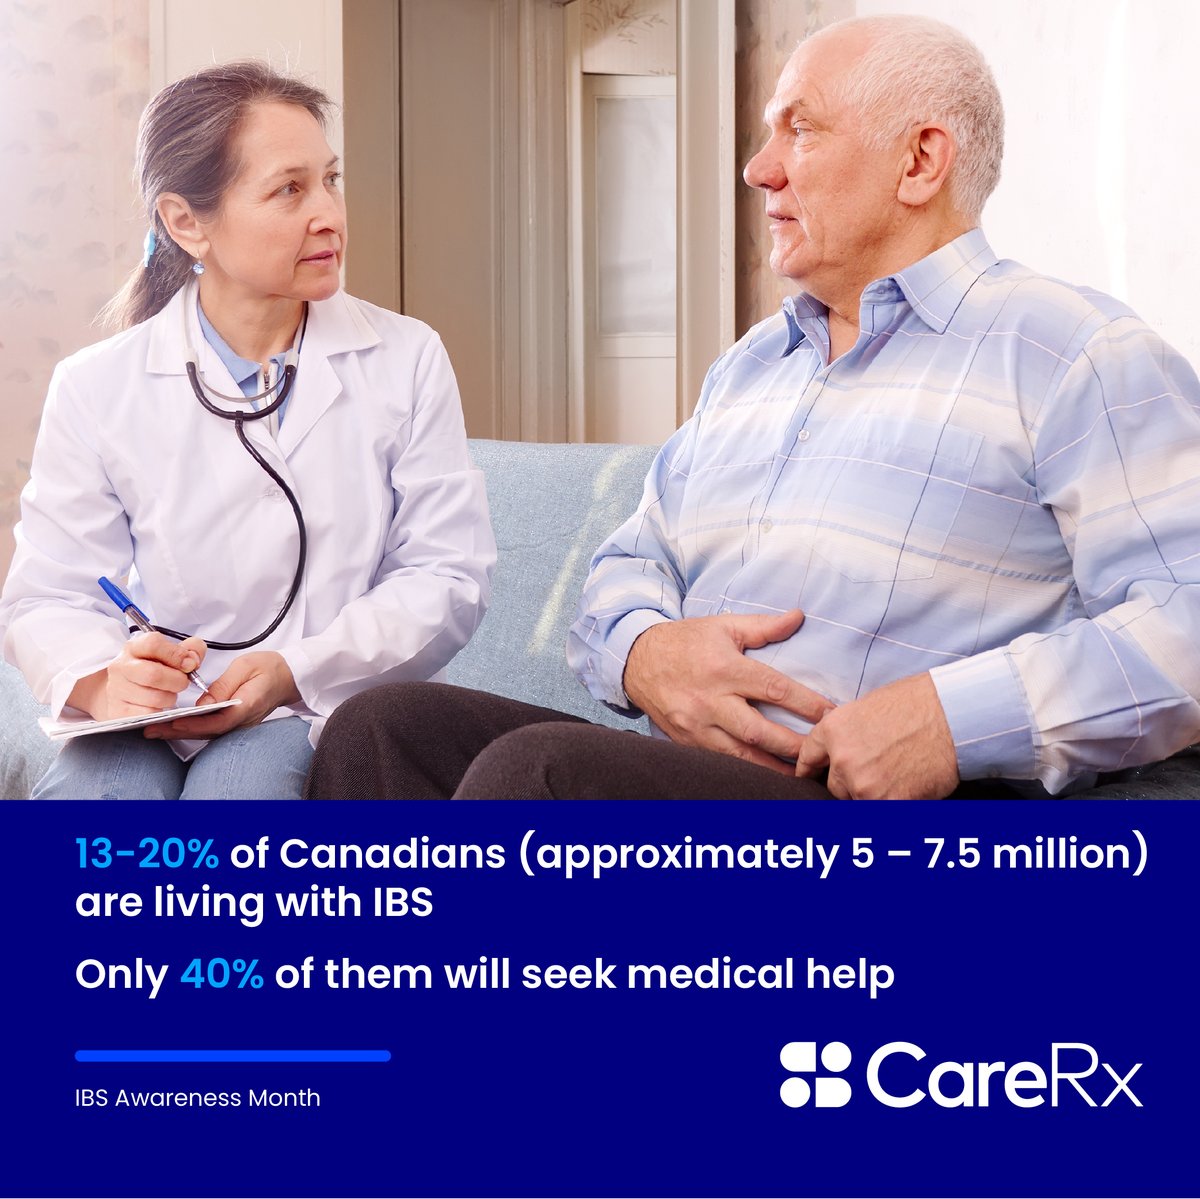 IBS is a condition where symptoms appear together, creating recurring pain in the abdominal area and causing bowel dysfunction. Common side effects include diarrhea, constipation, or both. If you are experiencing symptoms of IBS, talk to your healthcare team on how to manage it.